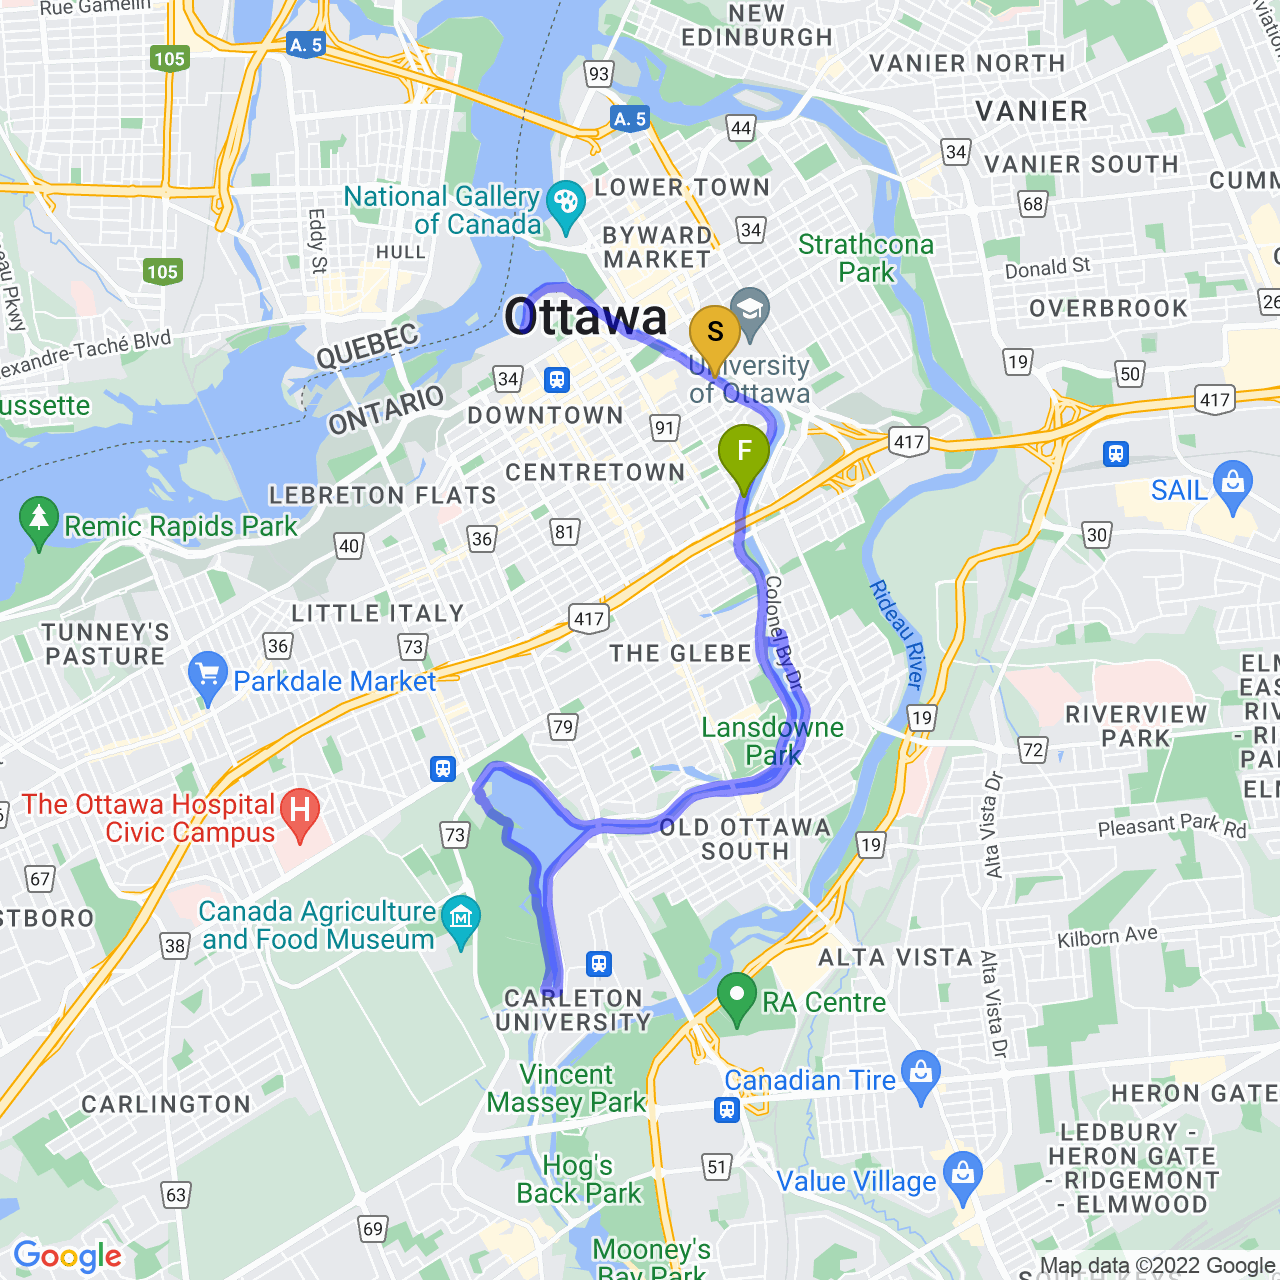 map of End of Winter Ride